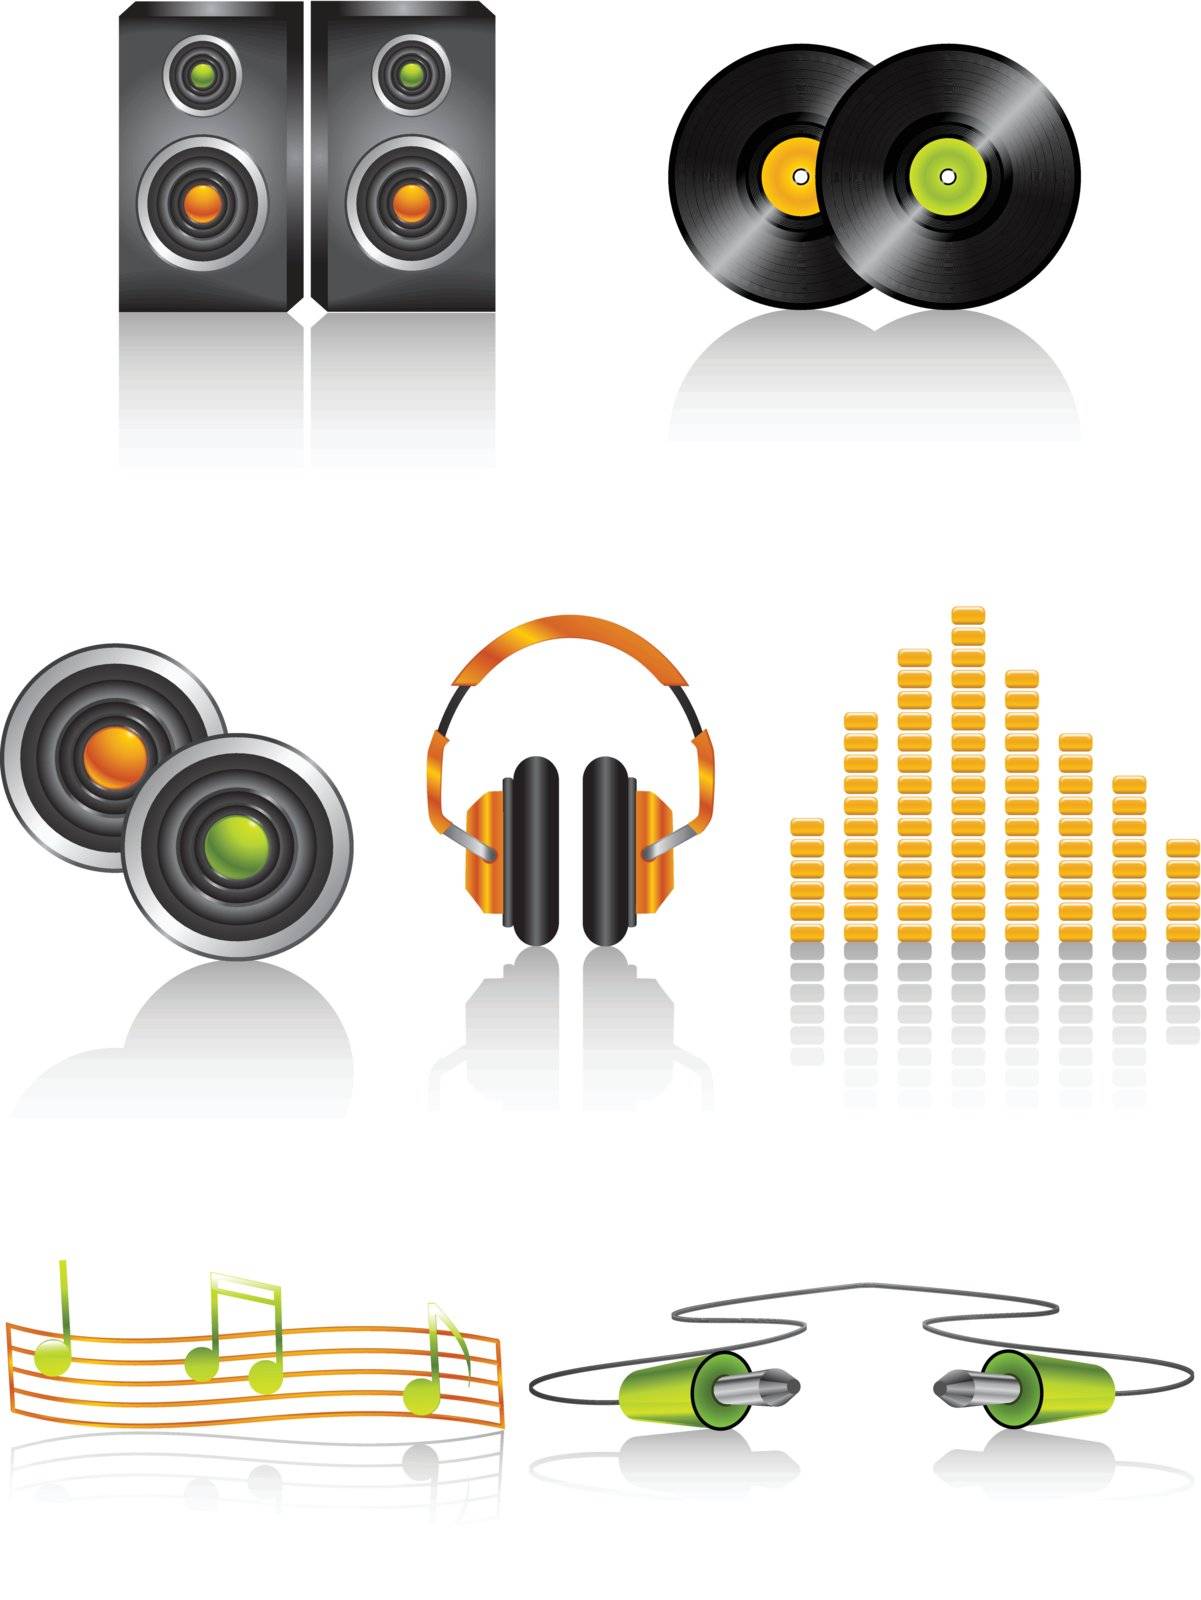 Music icons of speakers, vinyl discs, headphones, equalizer, music notes and jacks